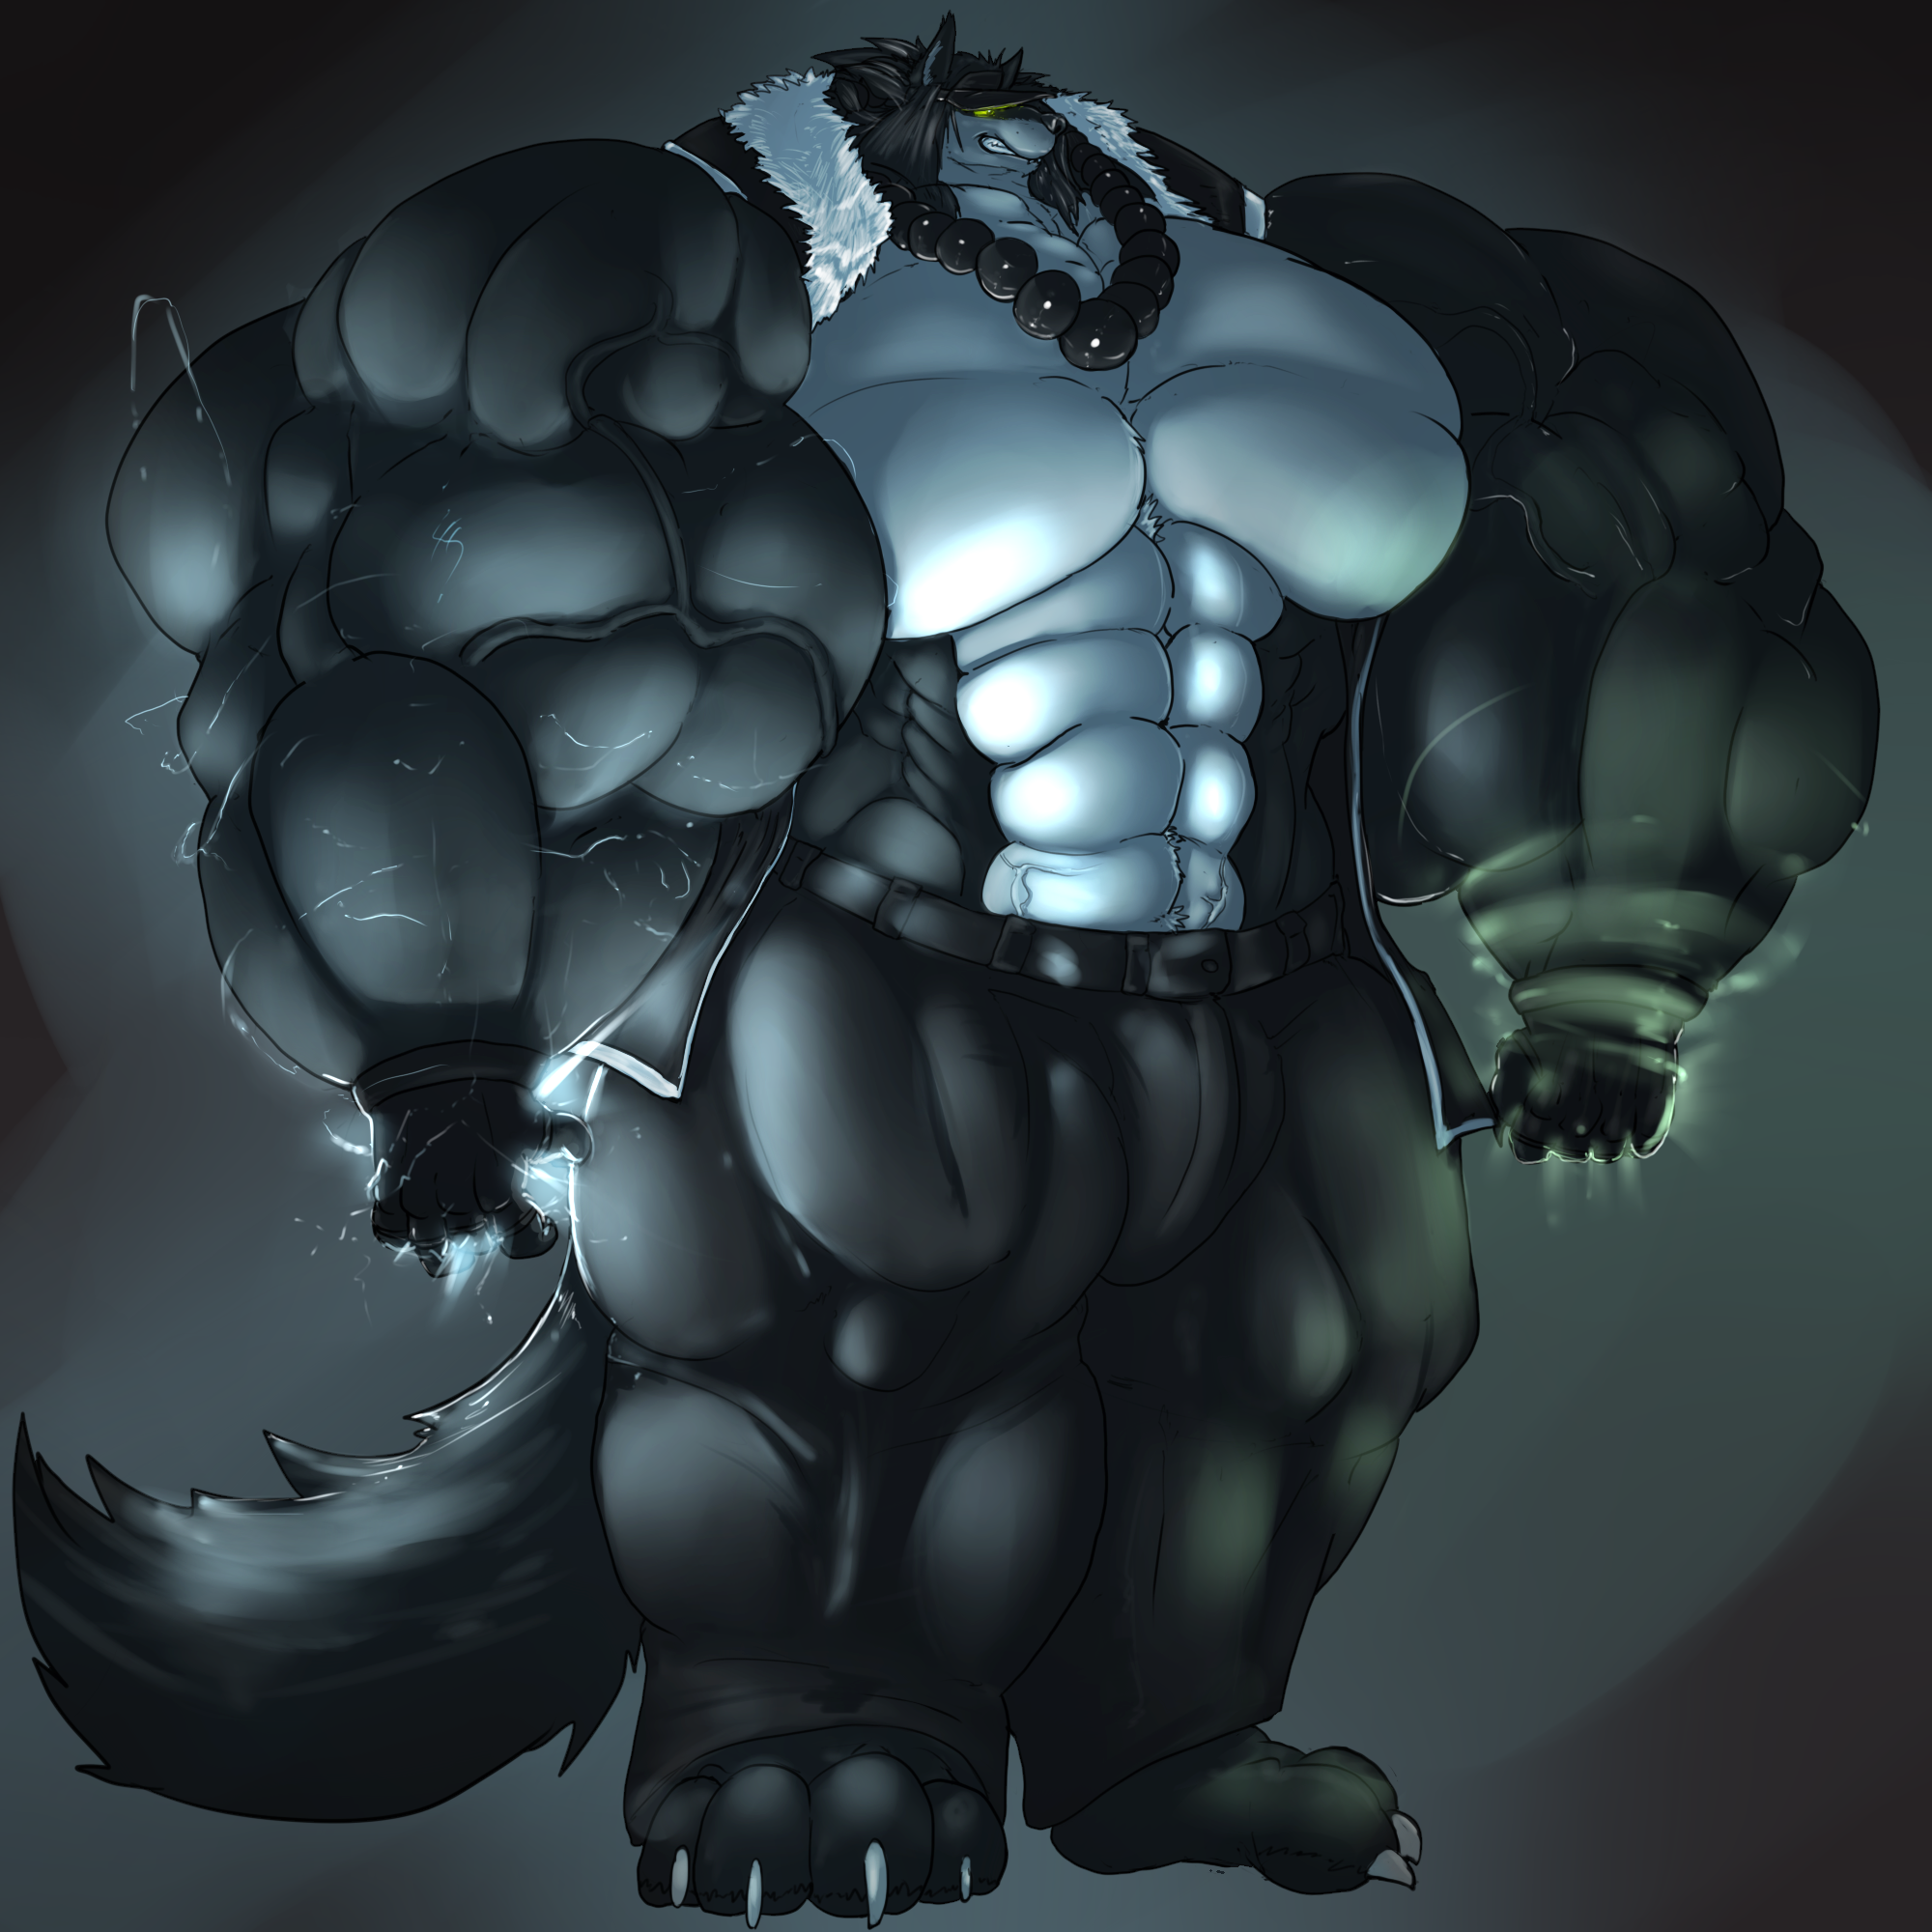 Hyper muscle growth Dragon